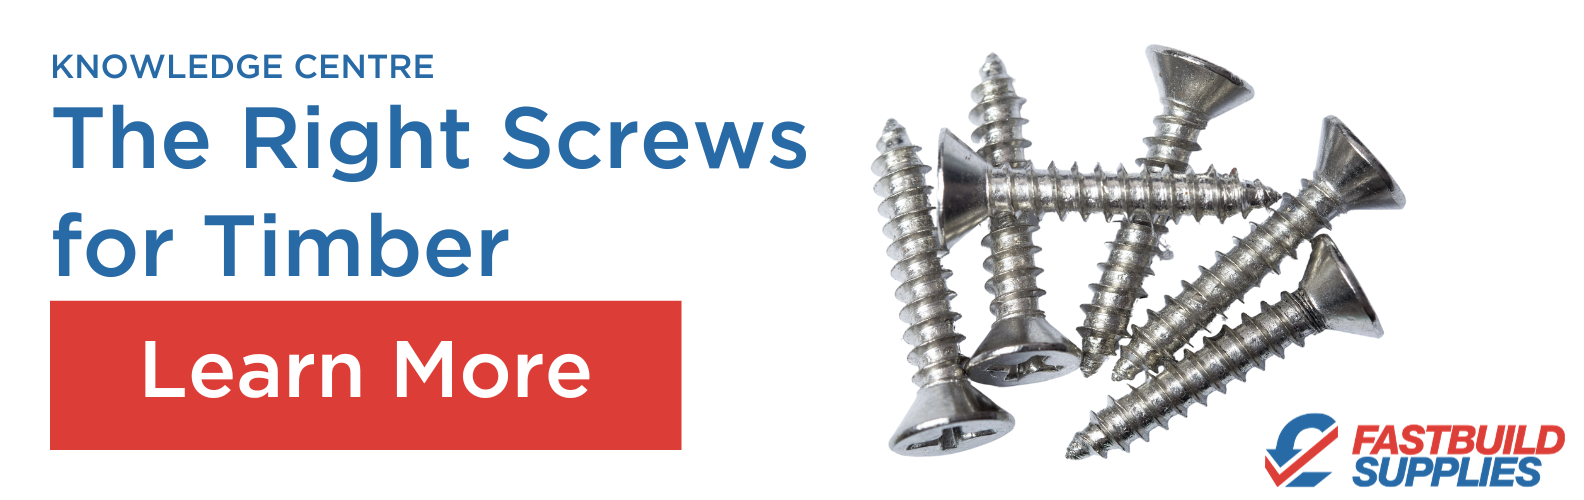 which are the right screws for timber